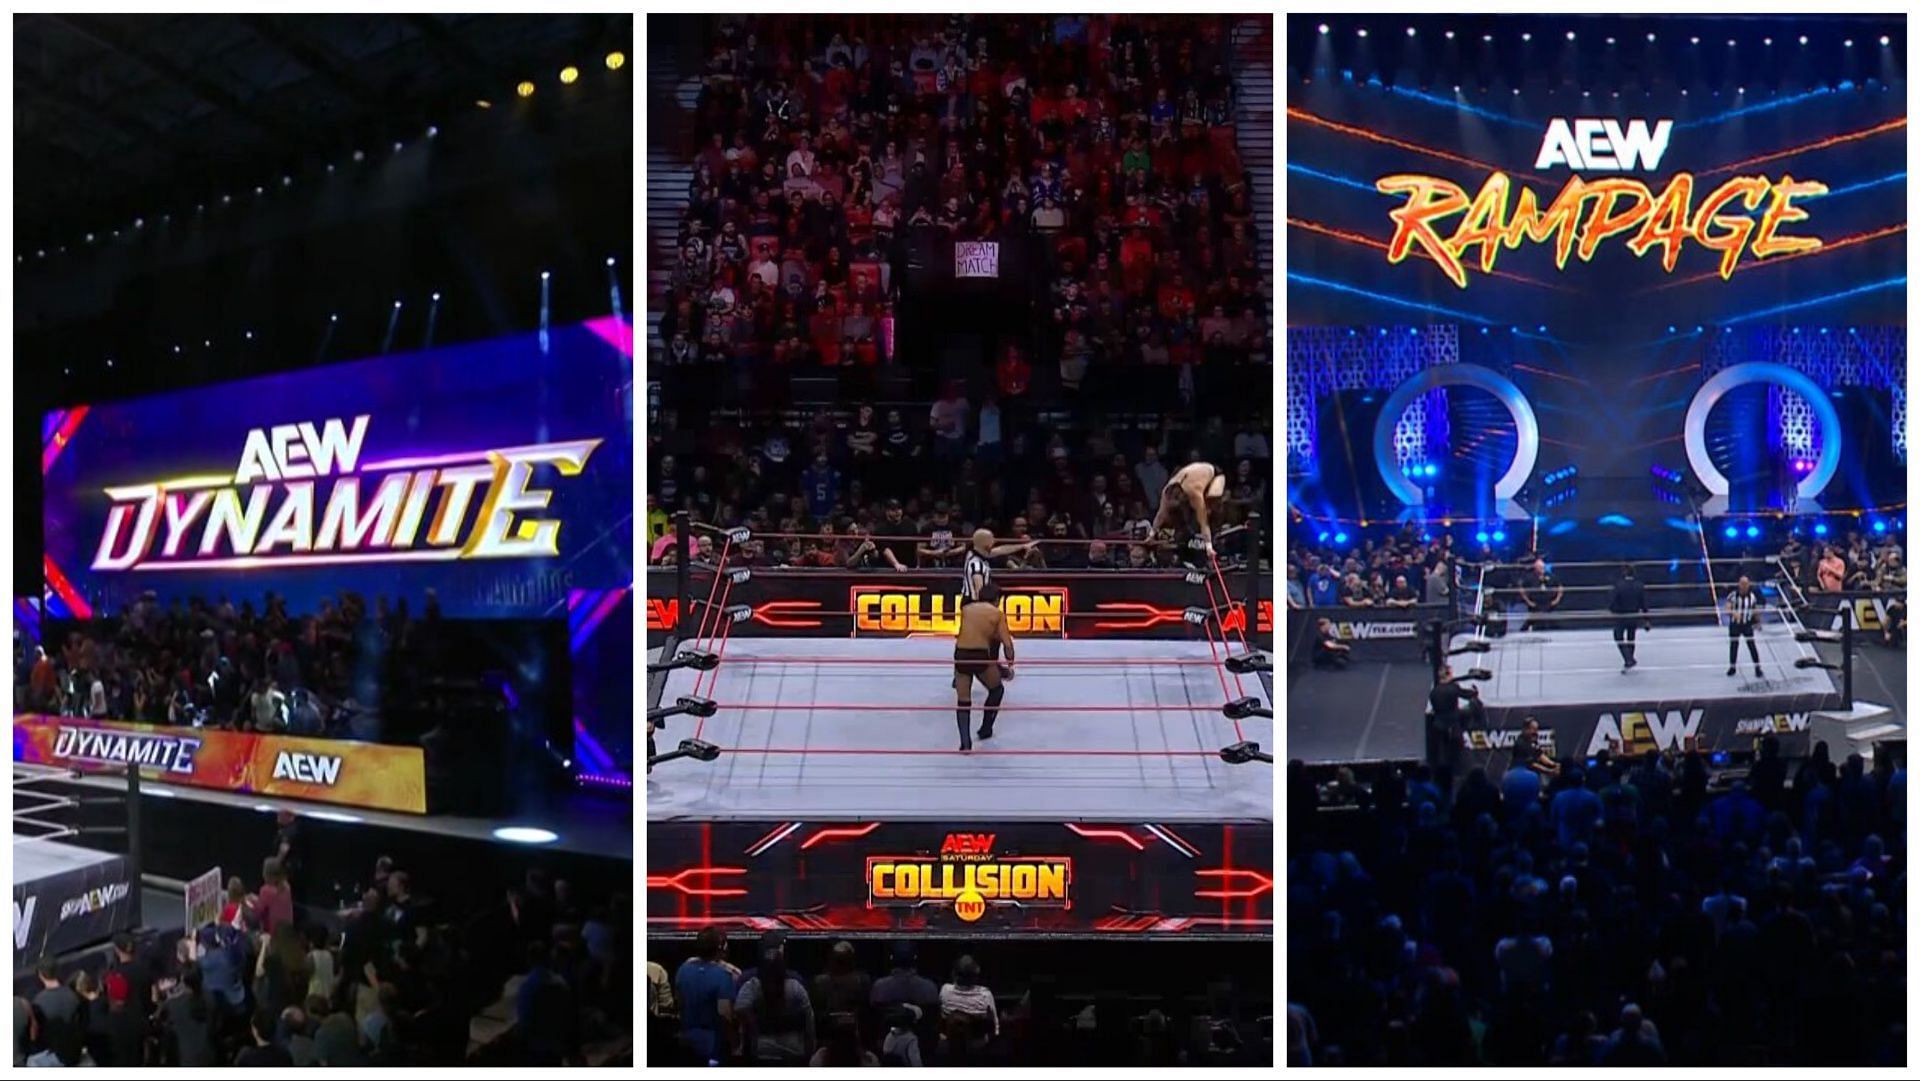 The ring and arena setups for AEW Dynamite, Collision, and Rampage